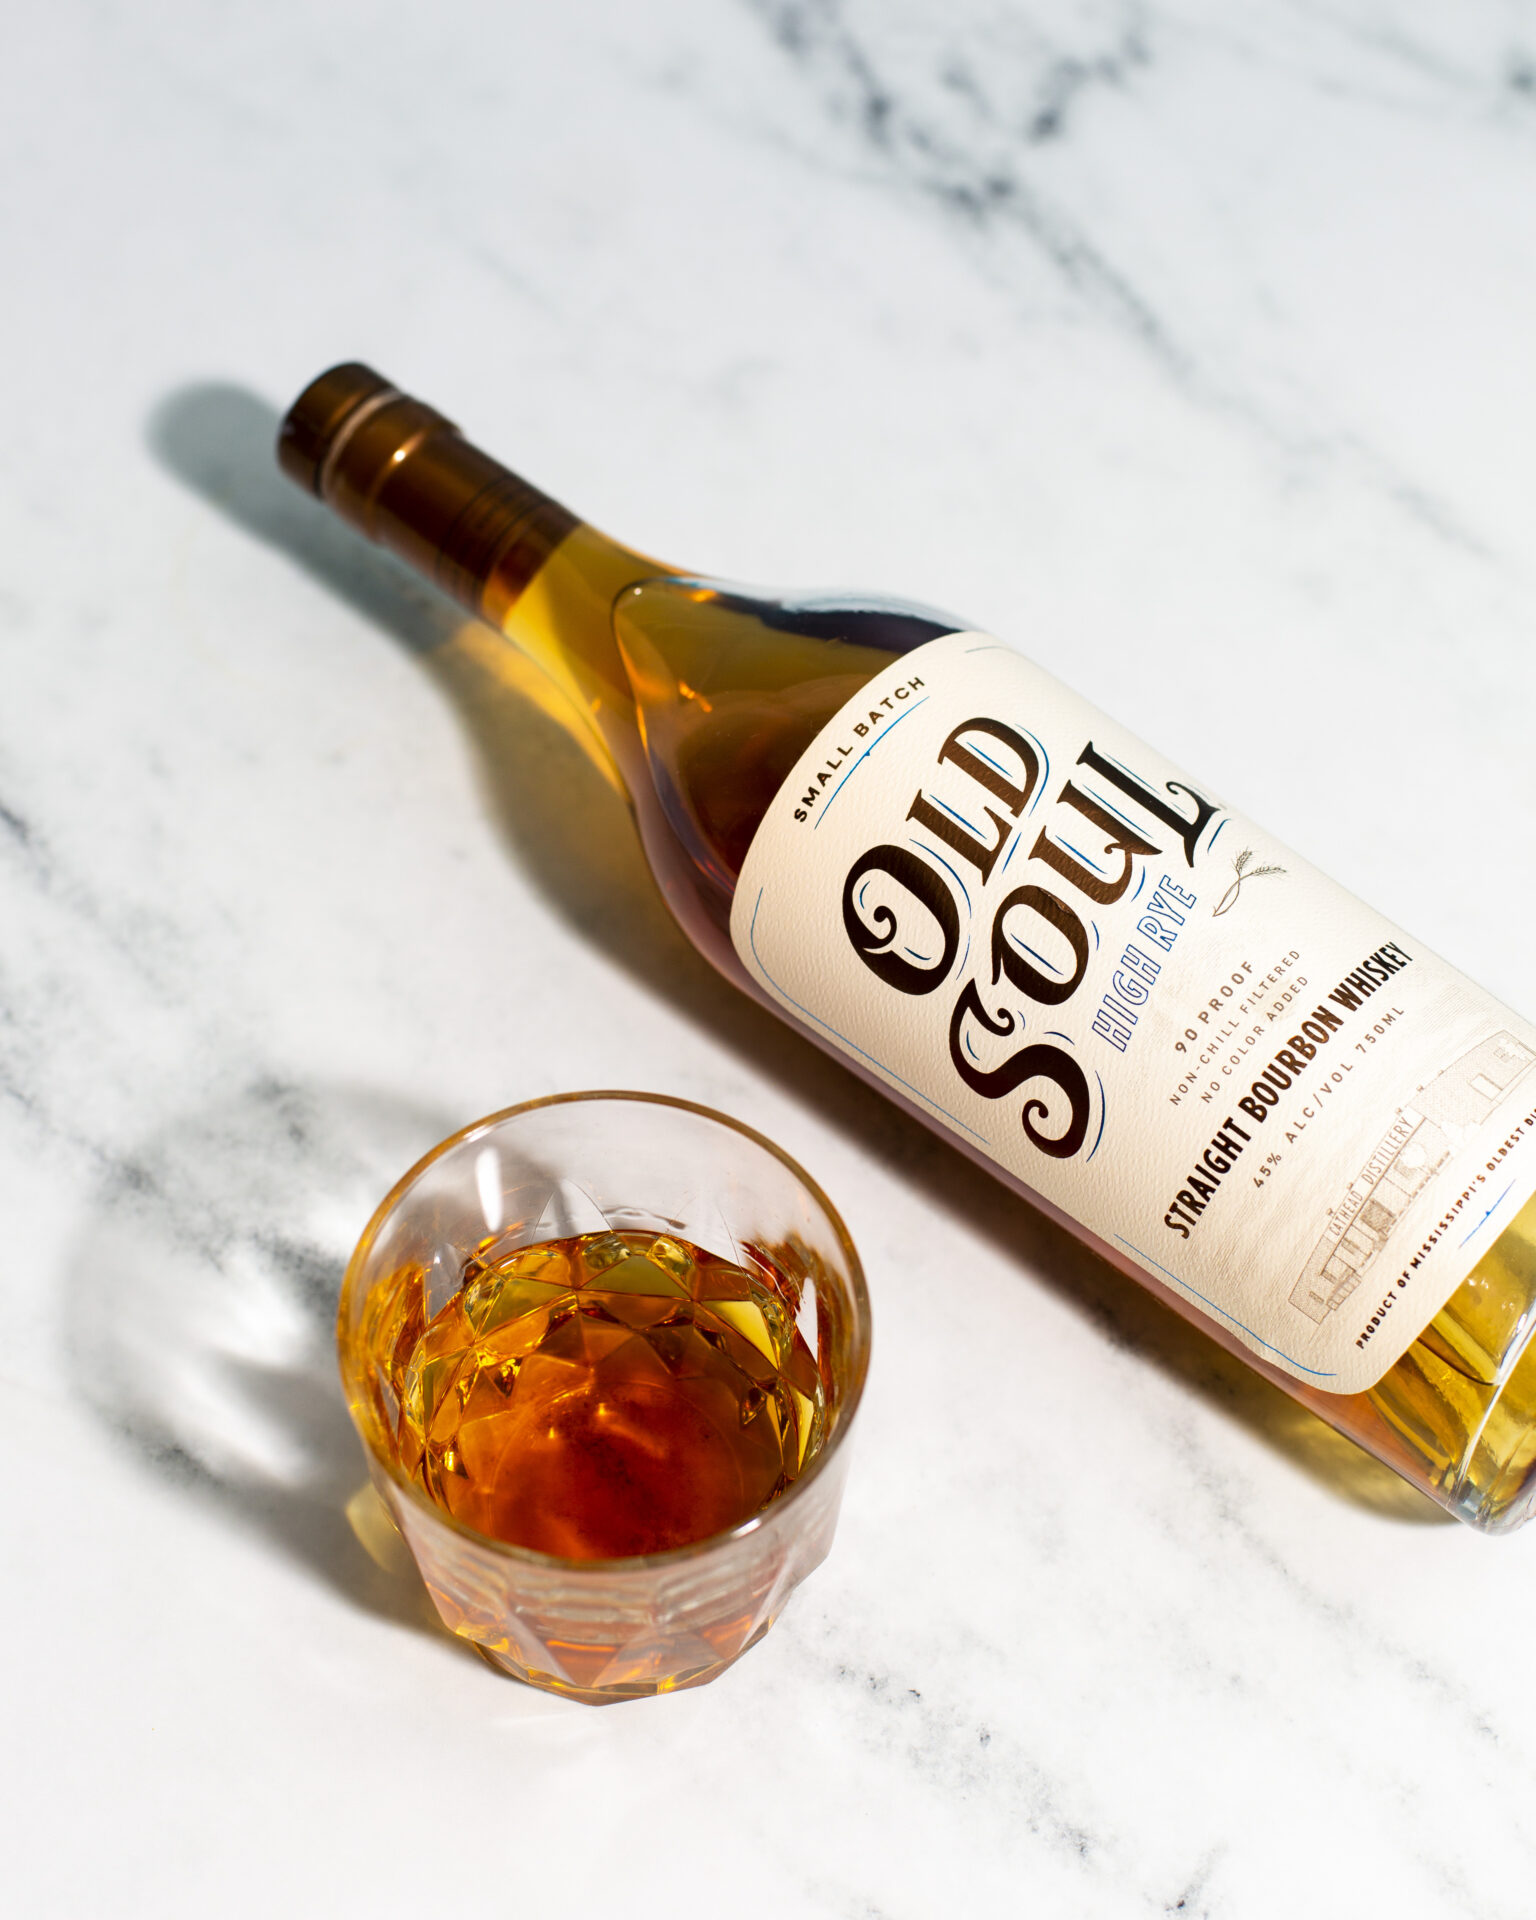 Old Soul Bourbon by Cathead Distillerypoured neat in a glass